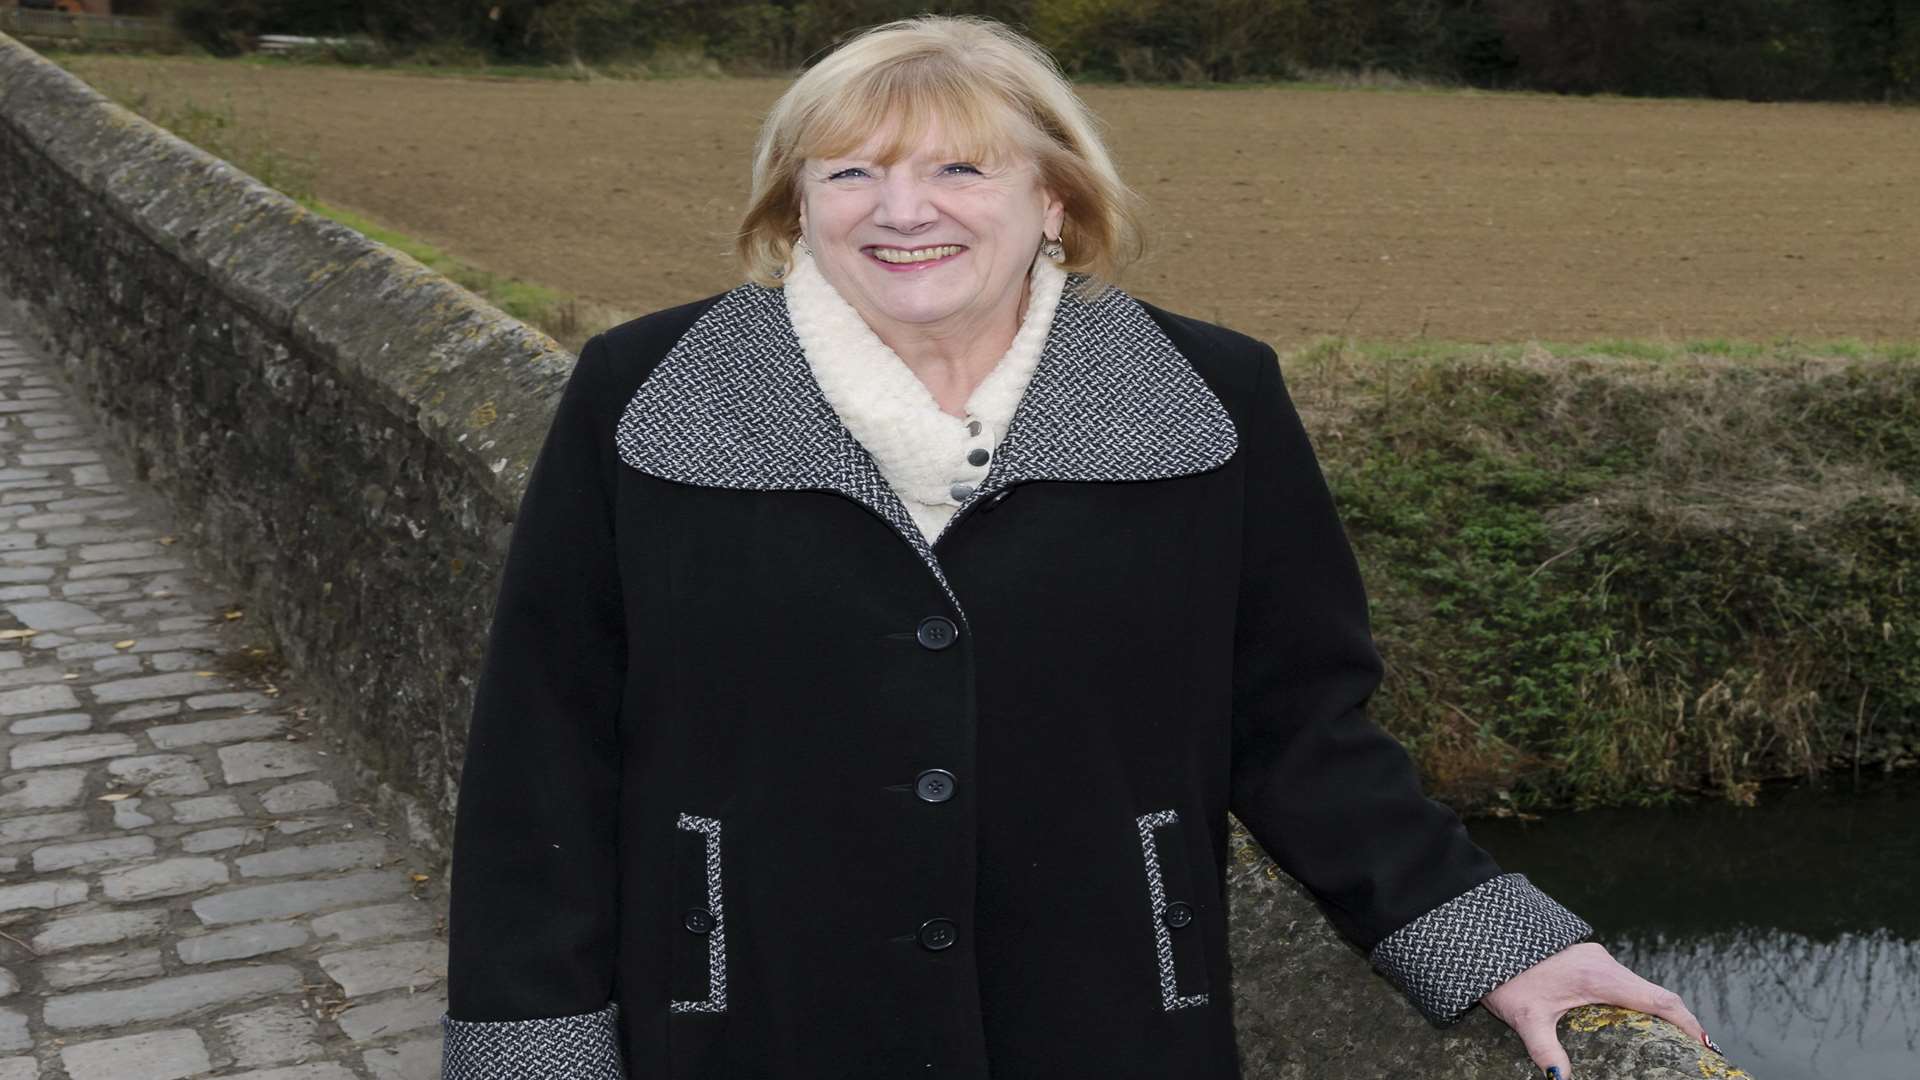 Geraldine Brown has been shortlisted for a Local Heroes award